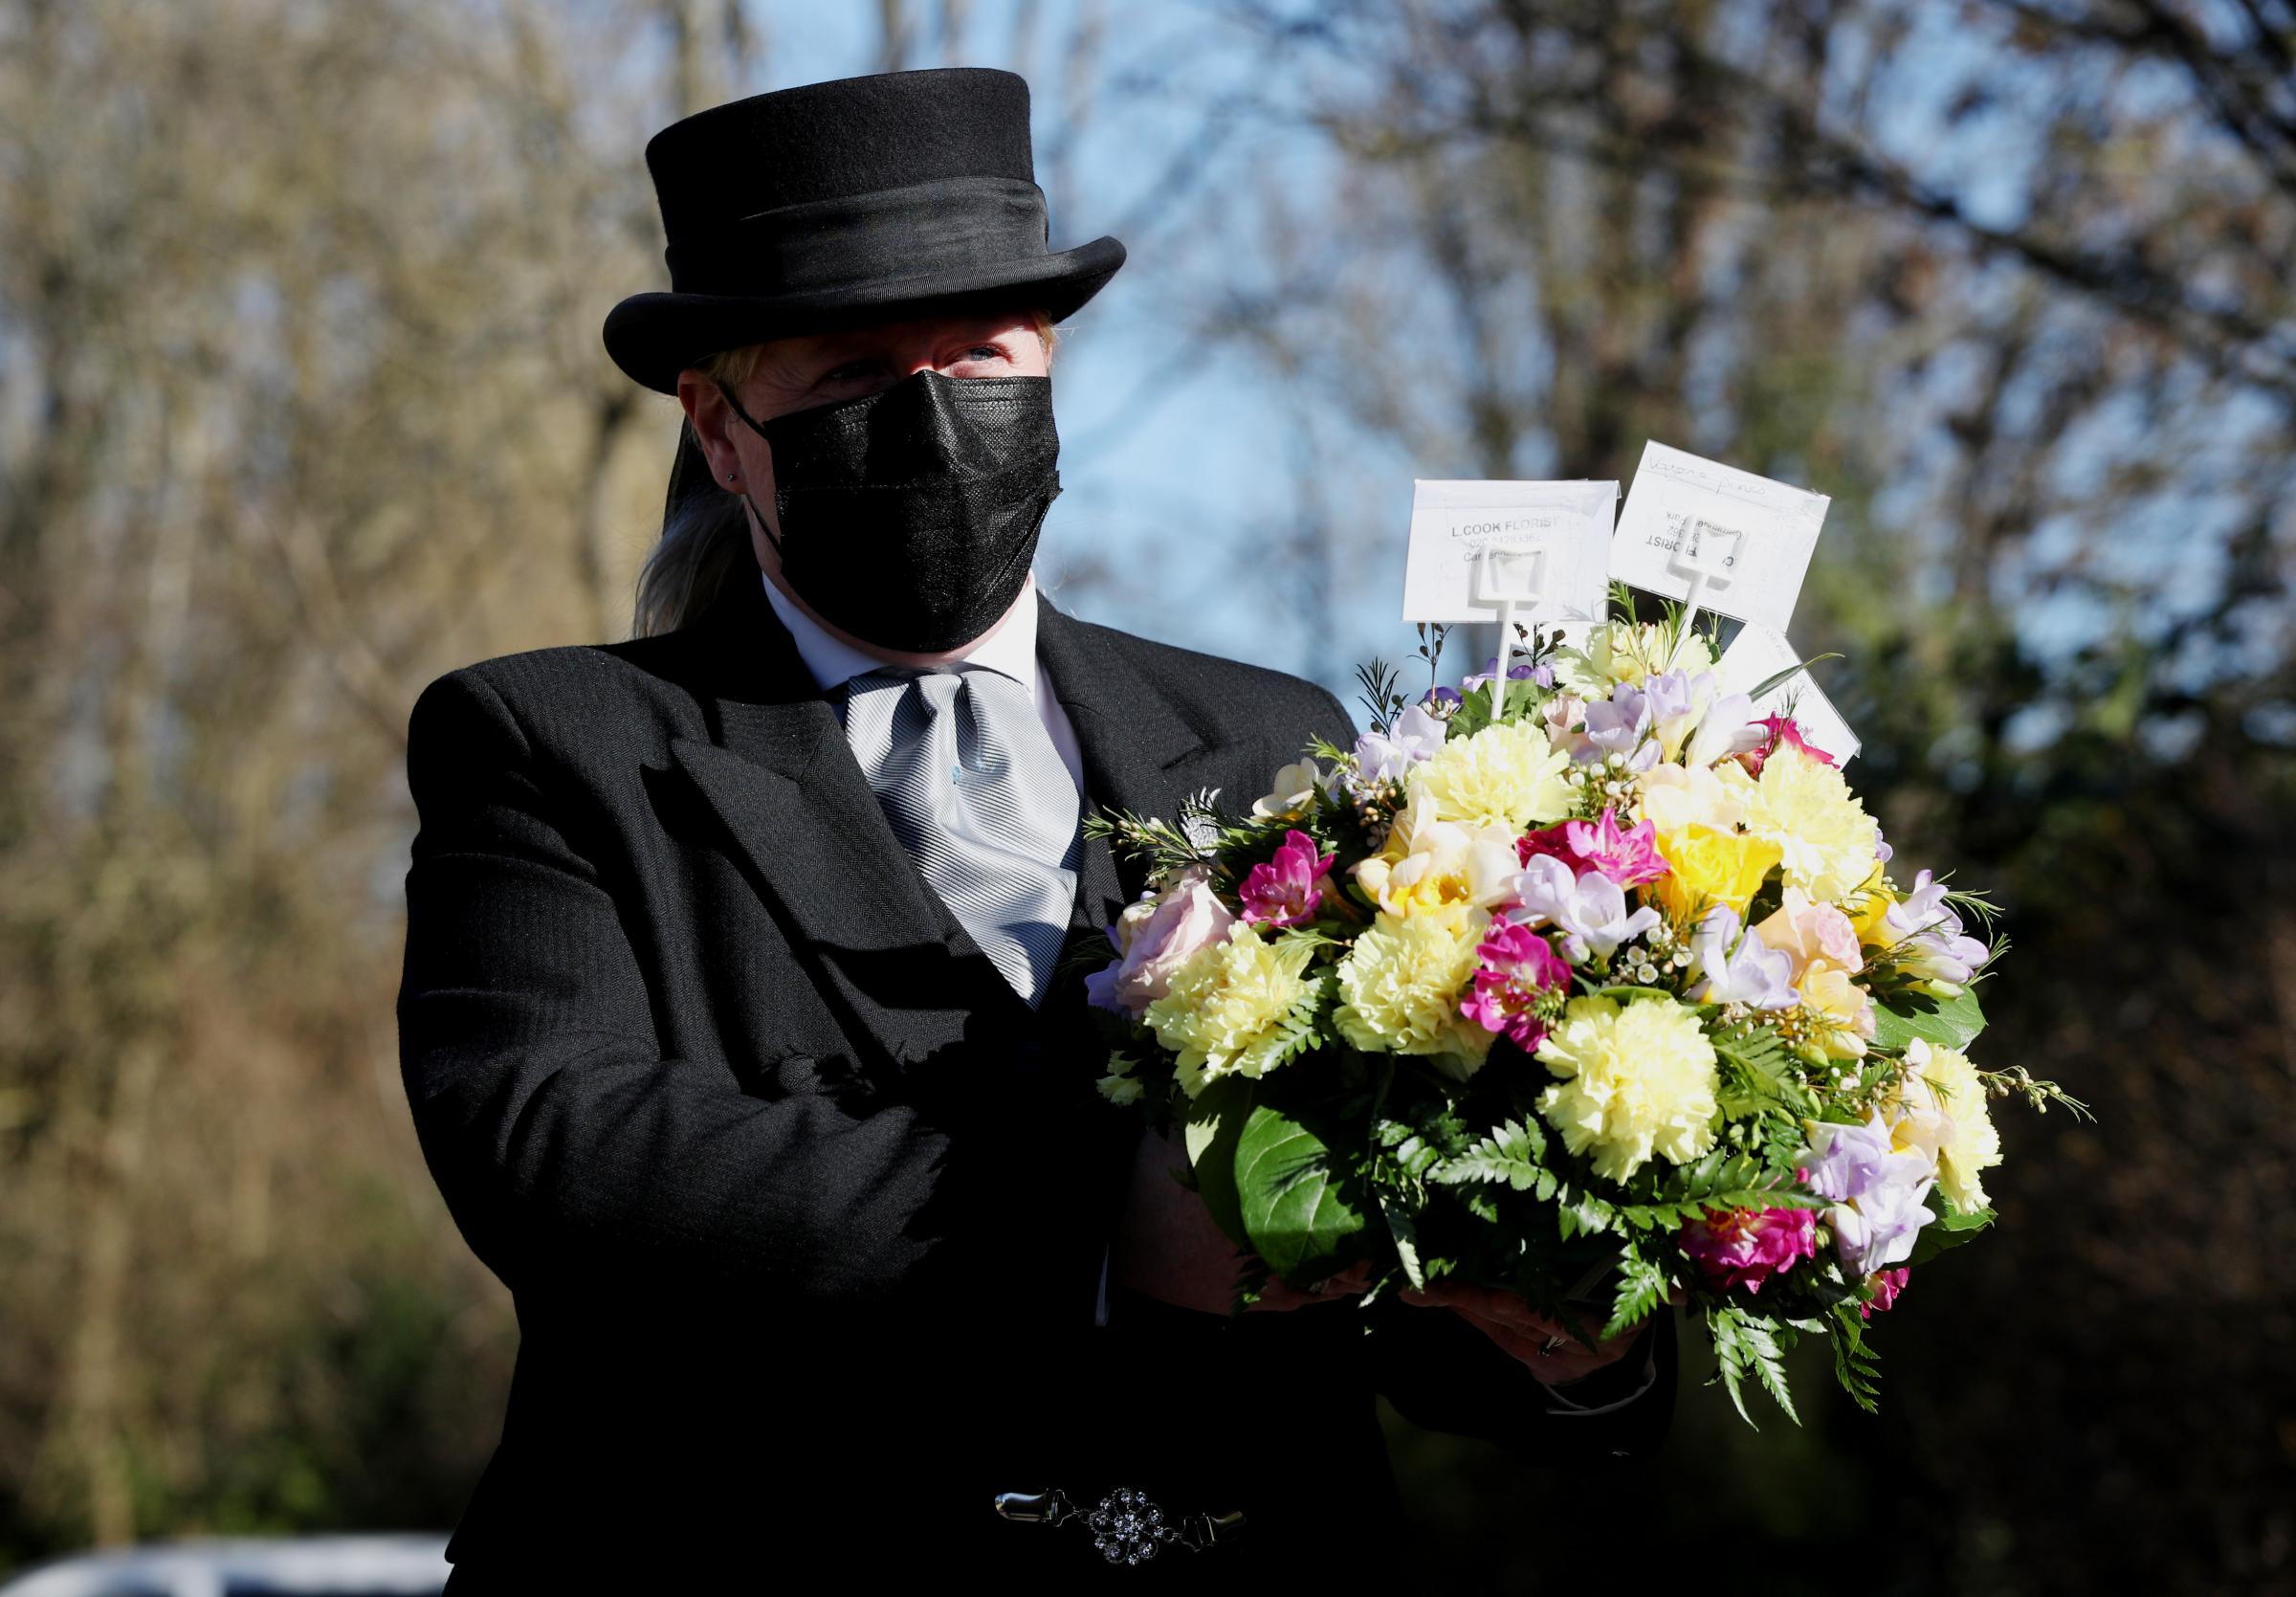 Funeral Director Colette Sworn gathers a floral tribute. Photo: PA